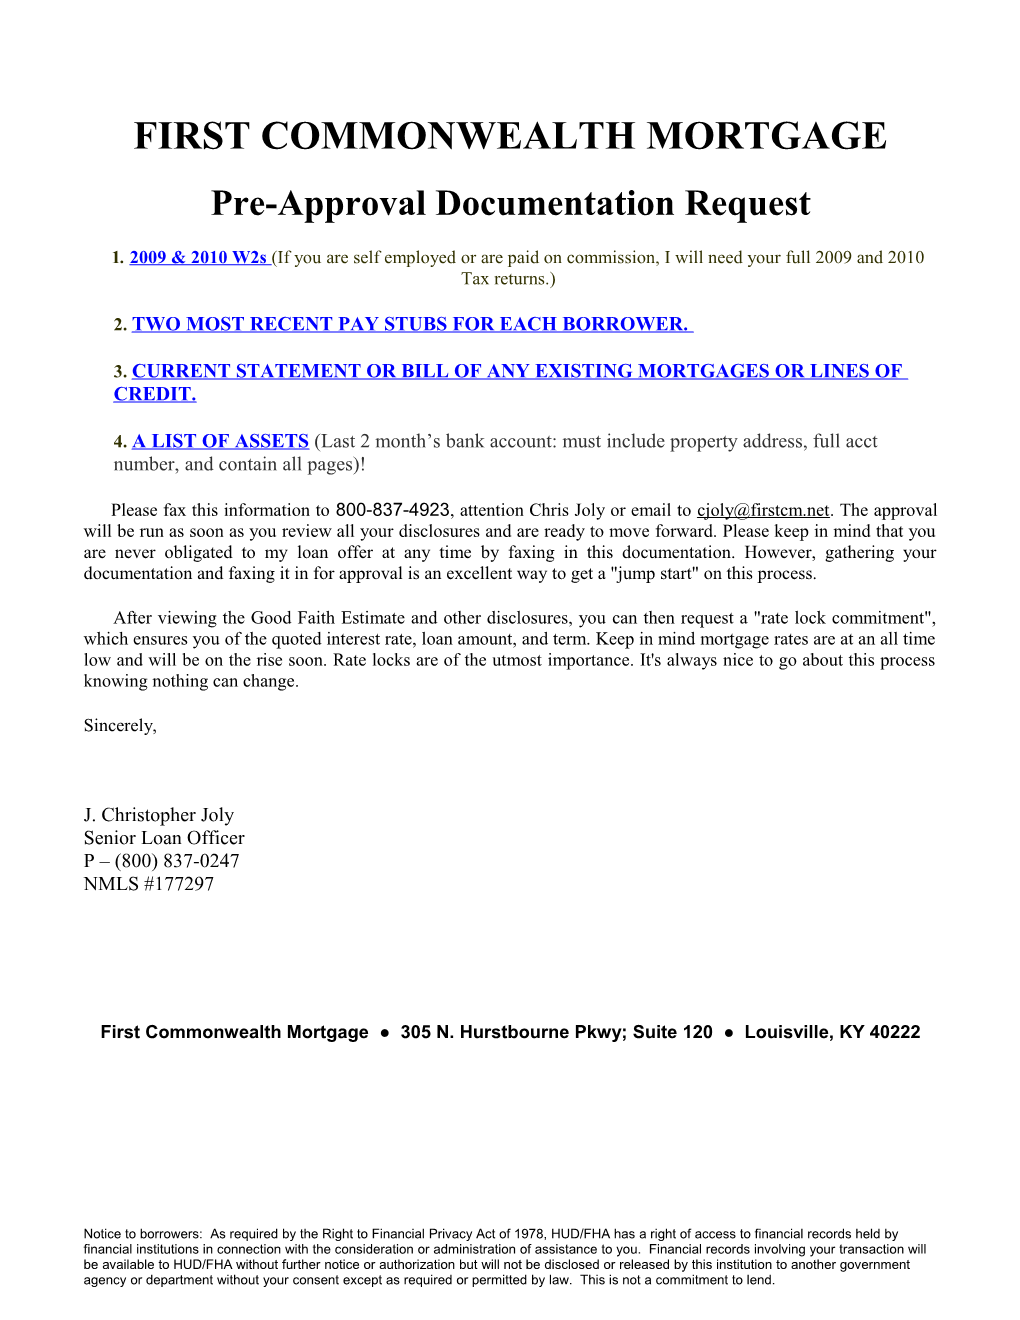 Pre-Approval Documentation Request